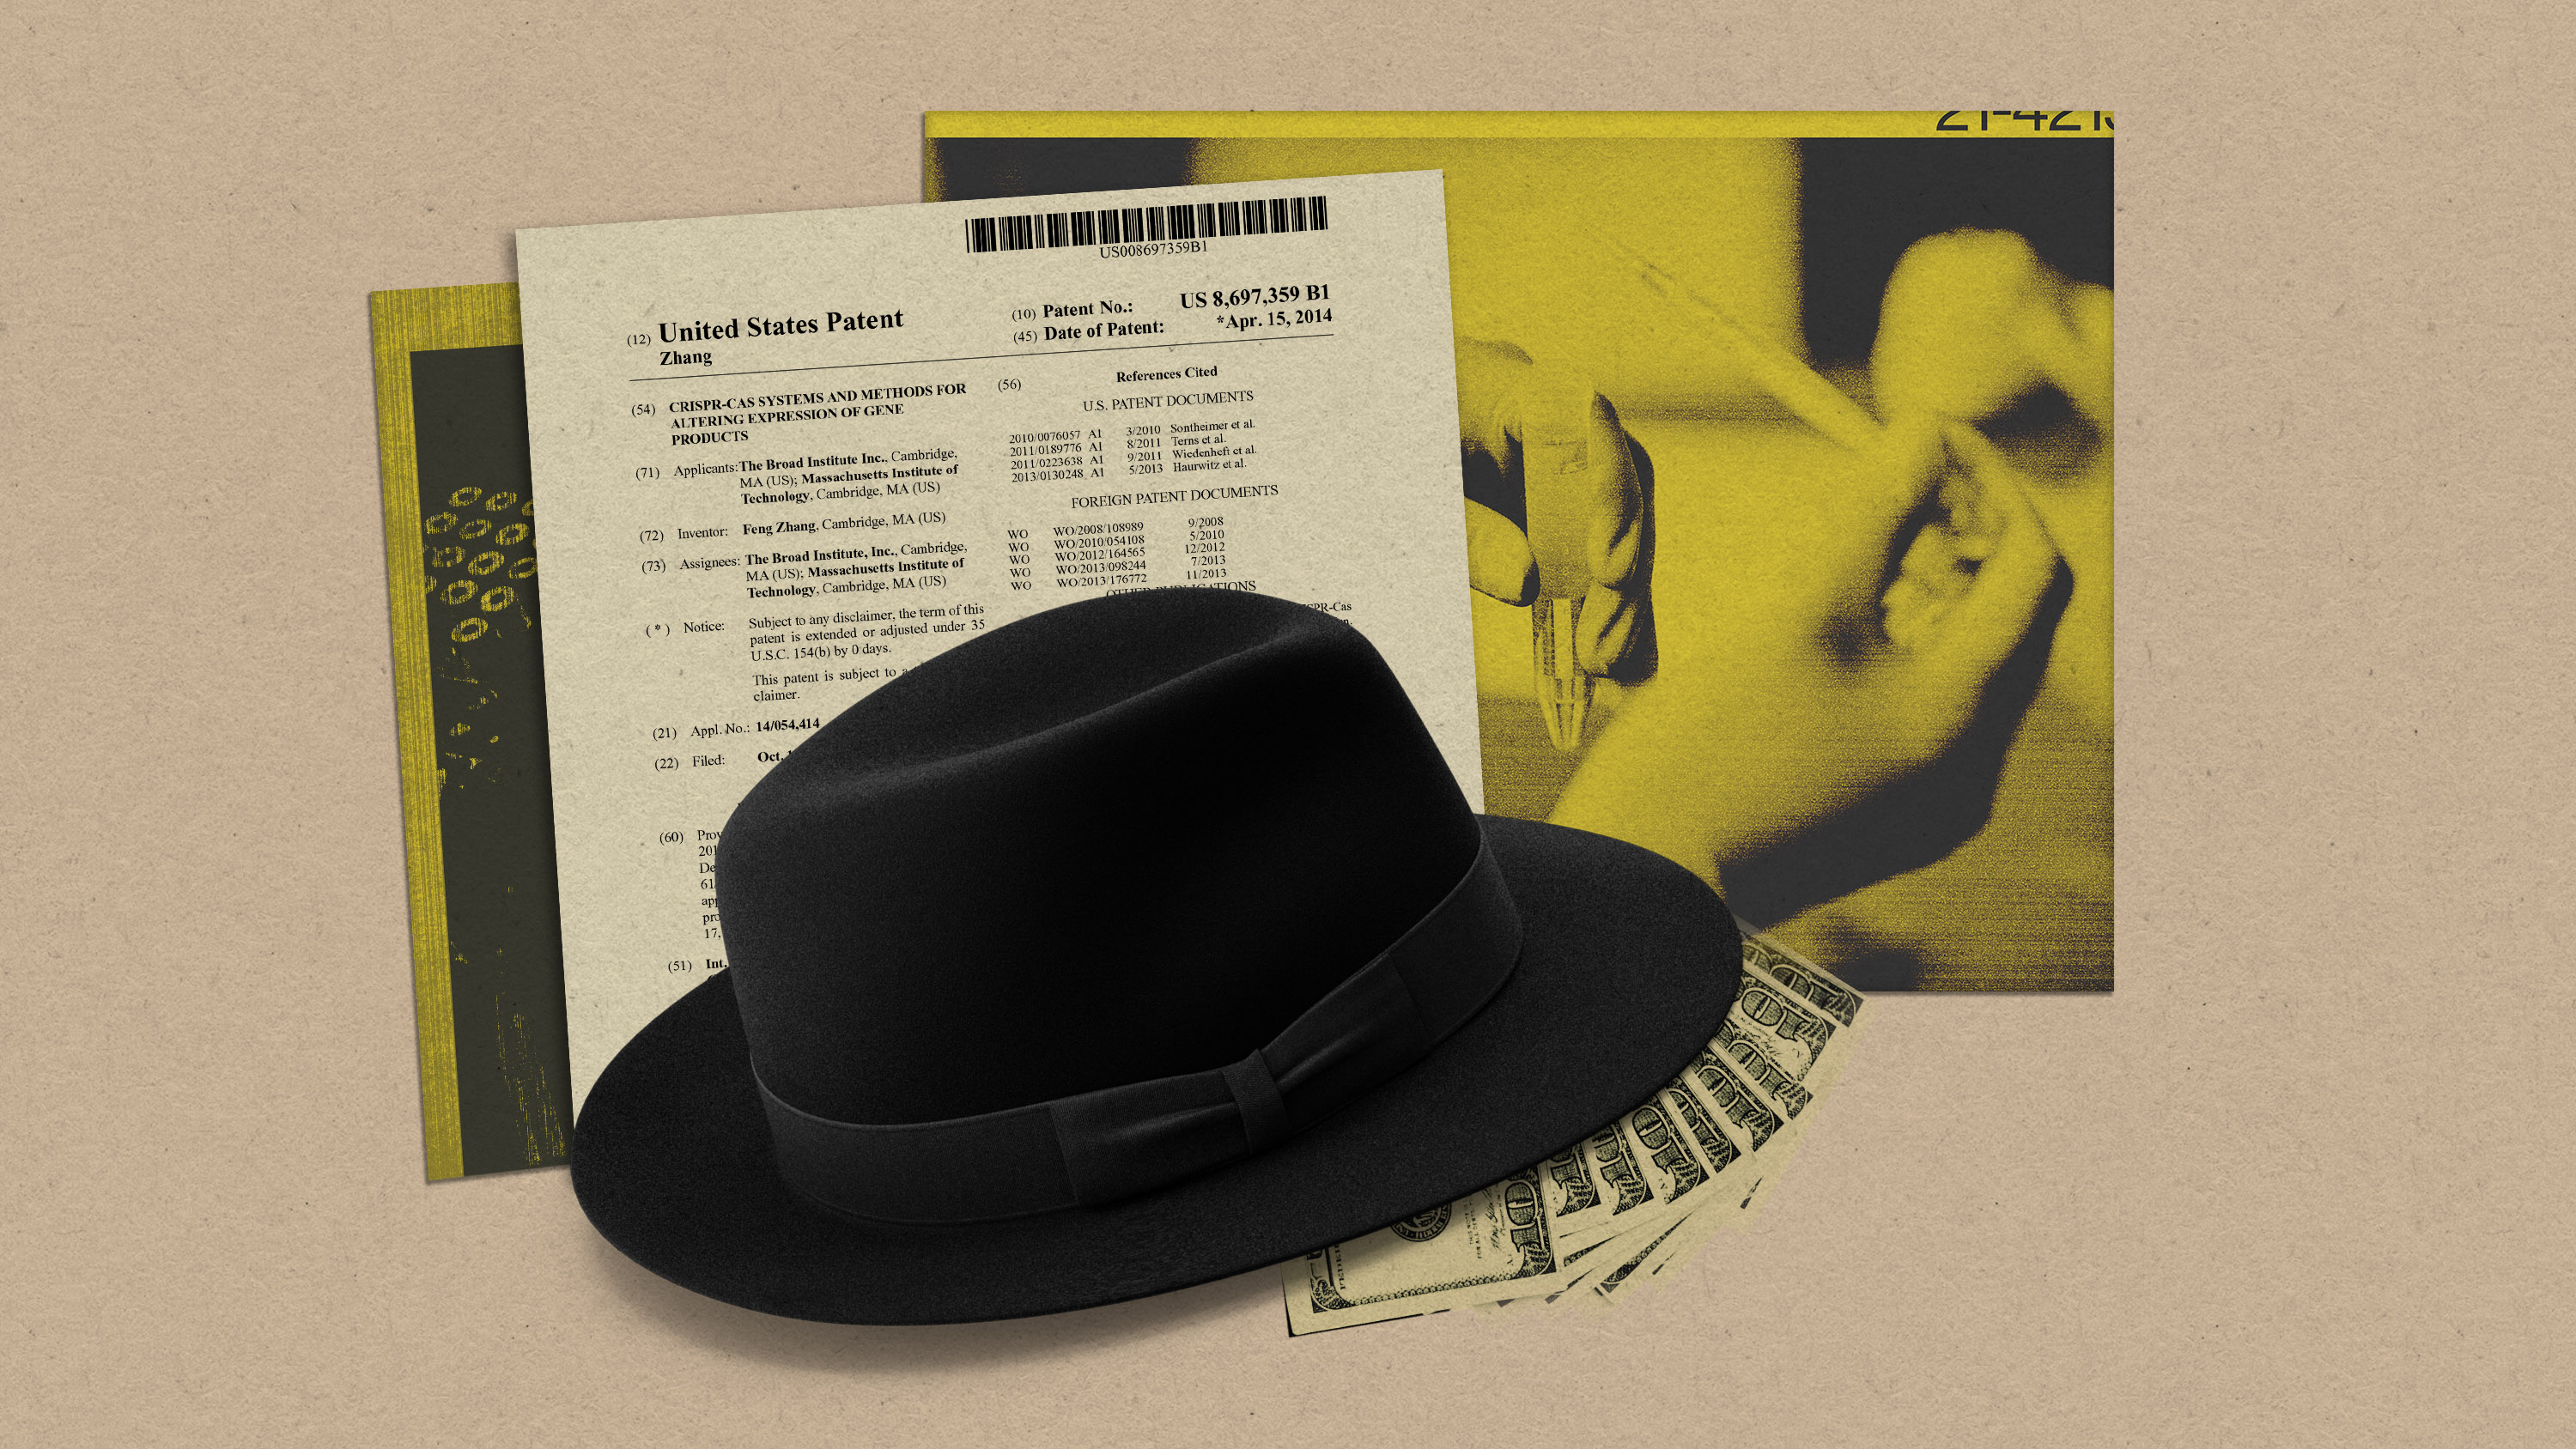 a fedora hat with a fan of hundred dollar bills protruding from underneath in front of the US Patent for CRISPR-CAS Systems and images of labwork